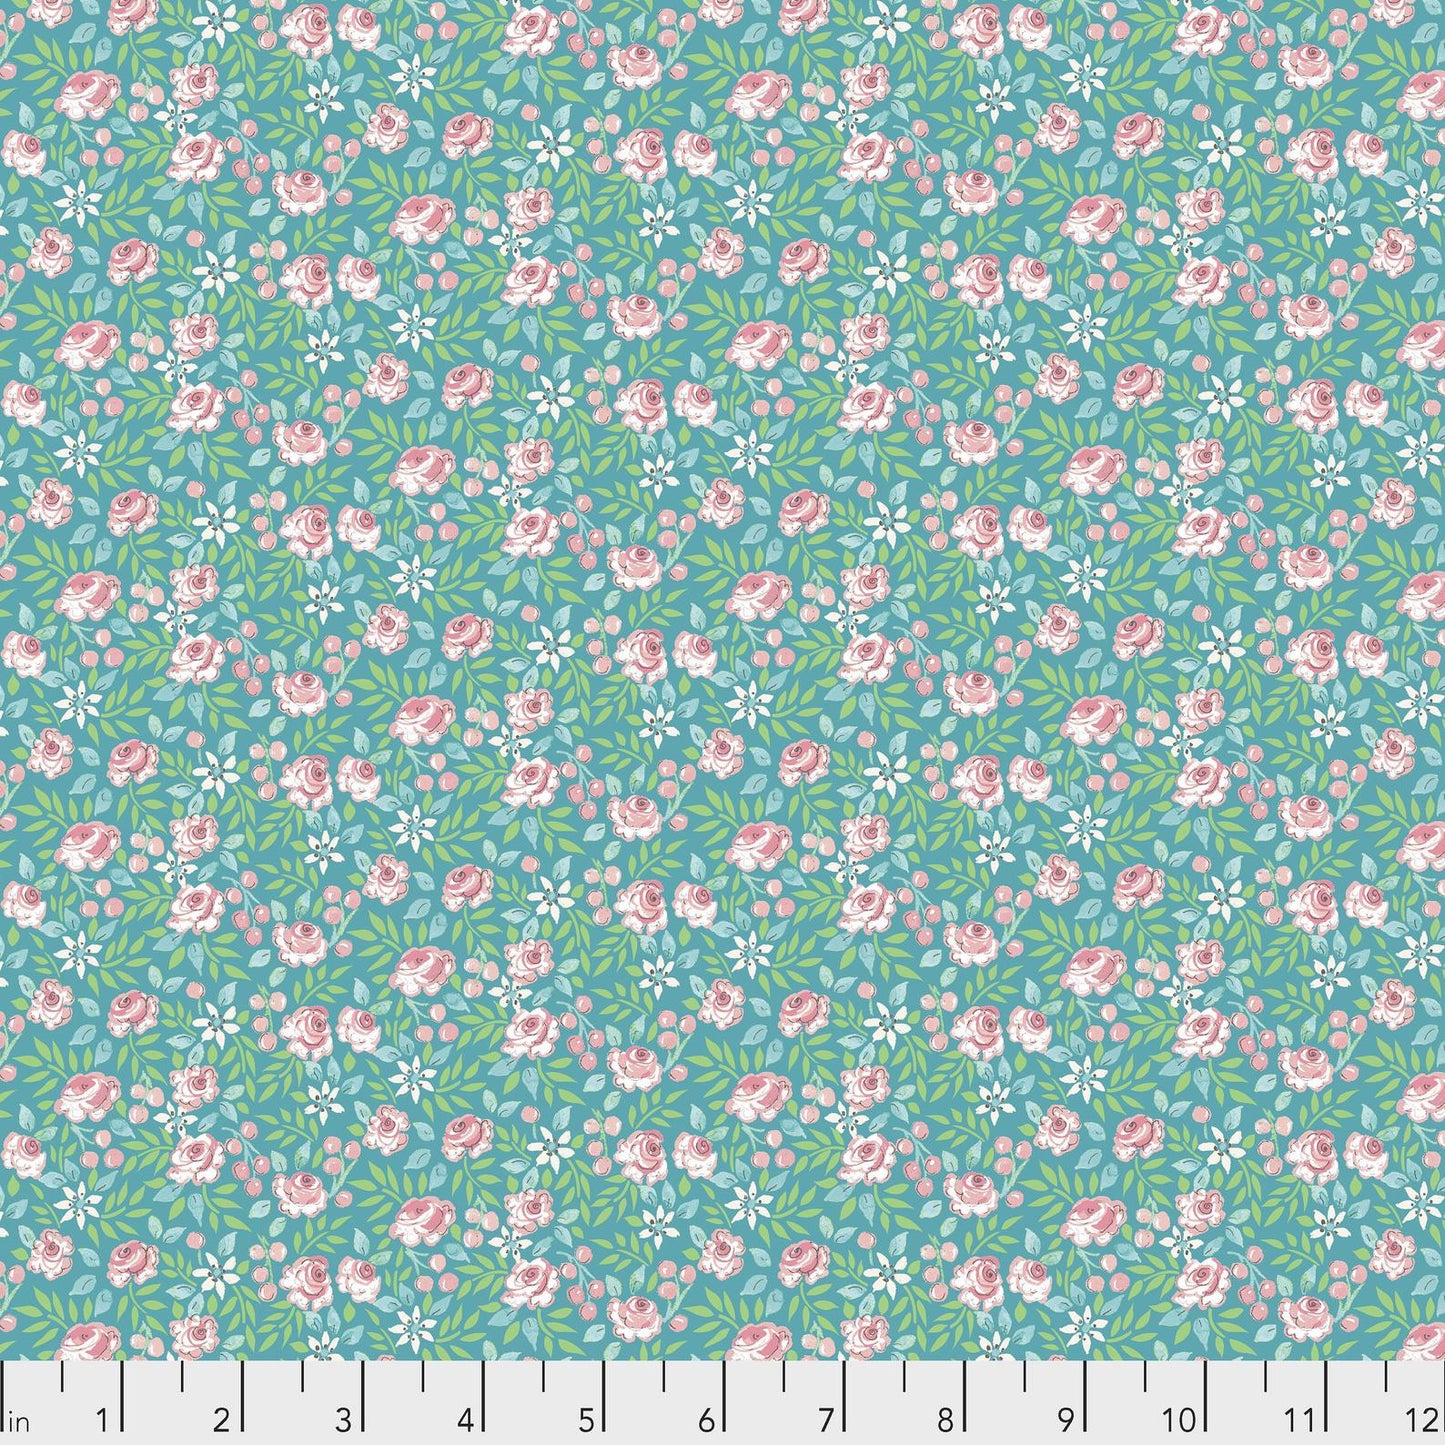 CANBERRA ROSE AQUA - from Adelaide Grove by Dena Designs - by Free Spirit Fabrics- 100% Cotton, Toad Hollow Fabrics